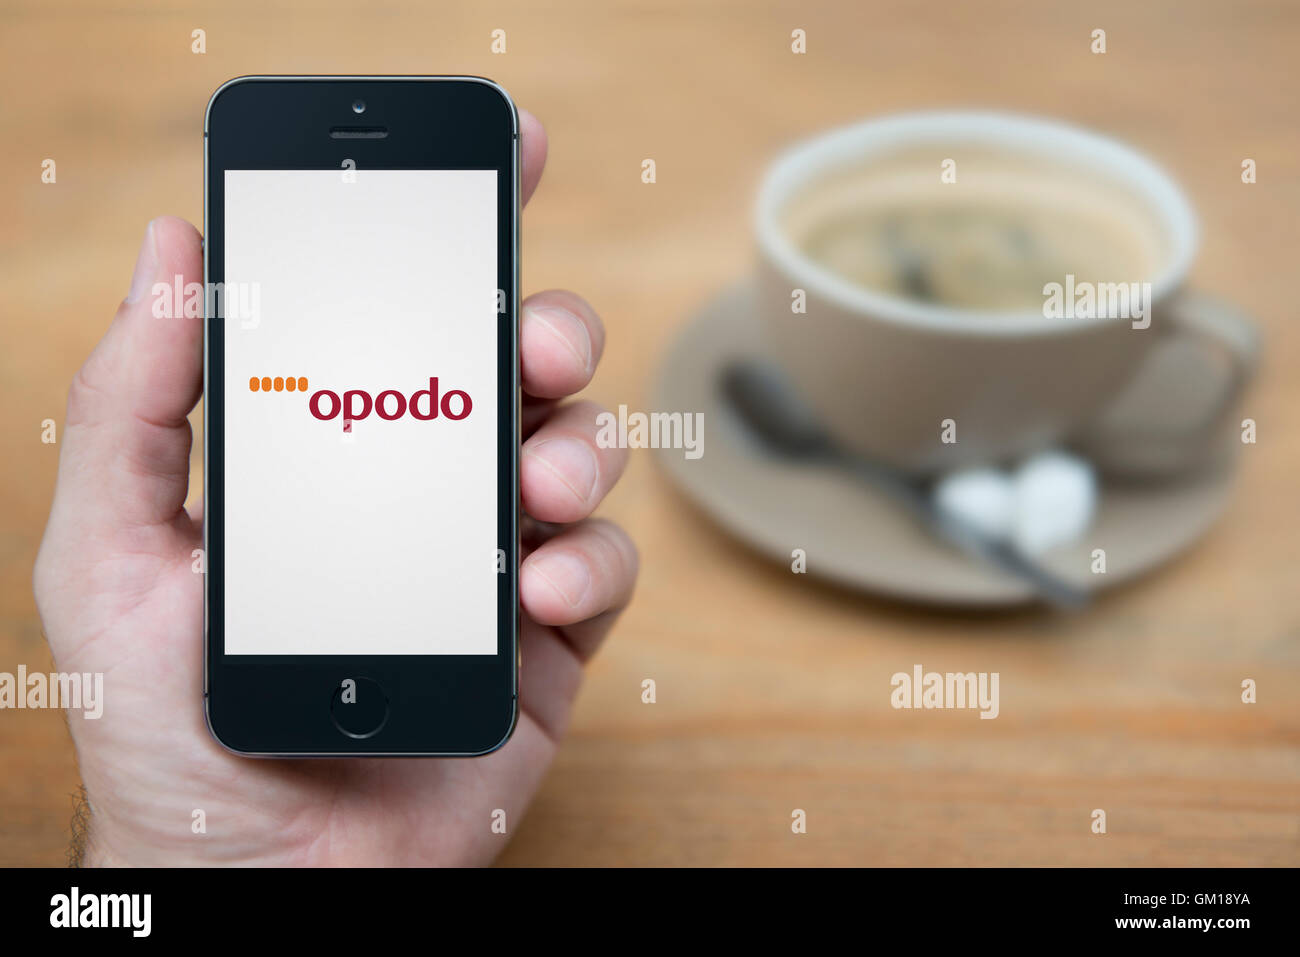 A man looks at his iPhone which displays the Opodo logo, while sat with a cup of coffee (Editorial use only). Stock Photo